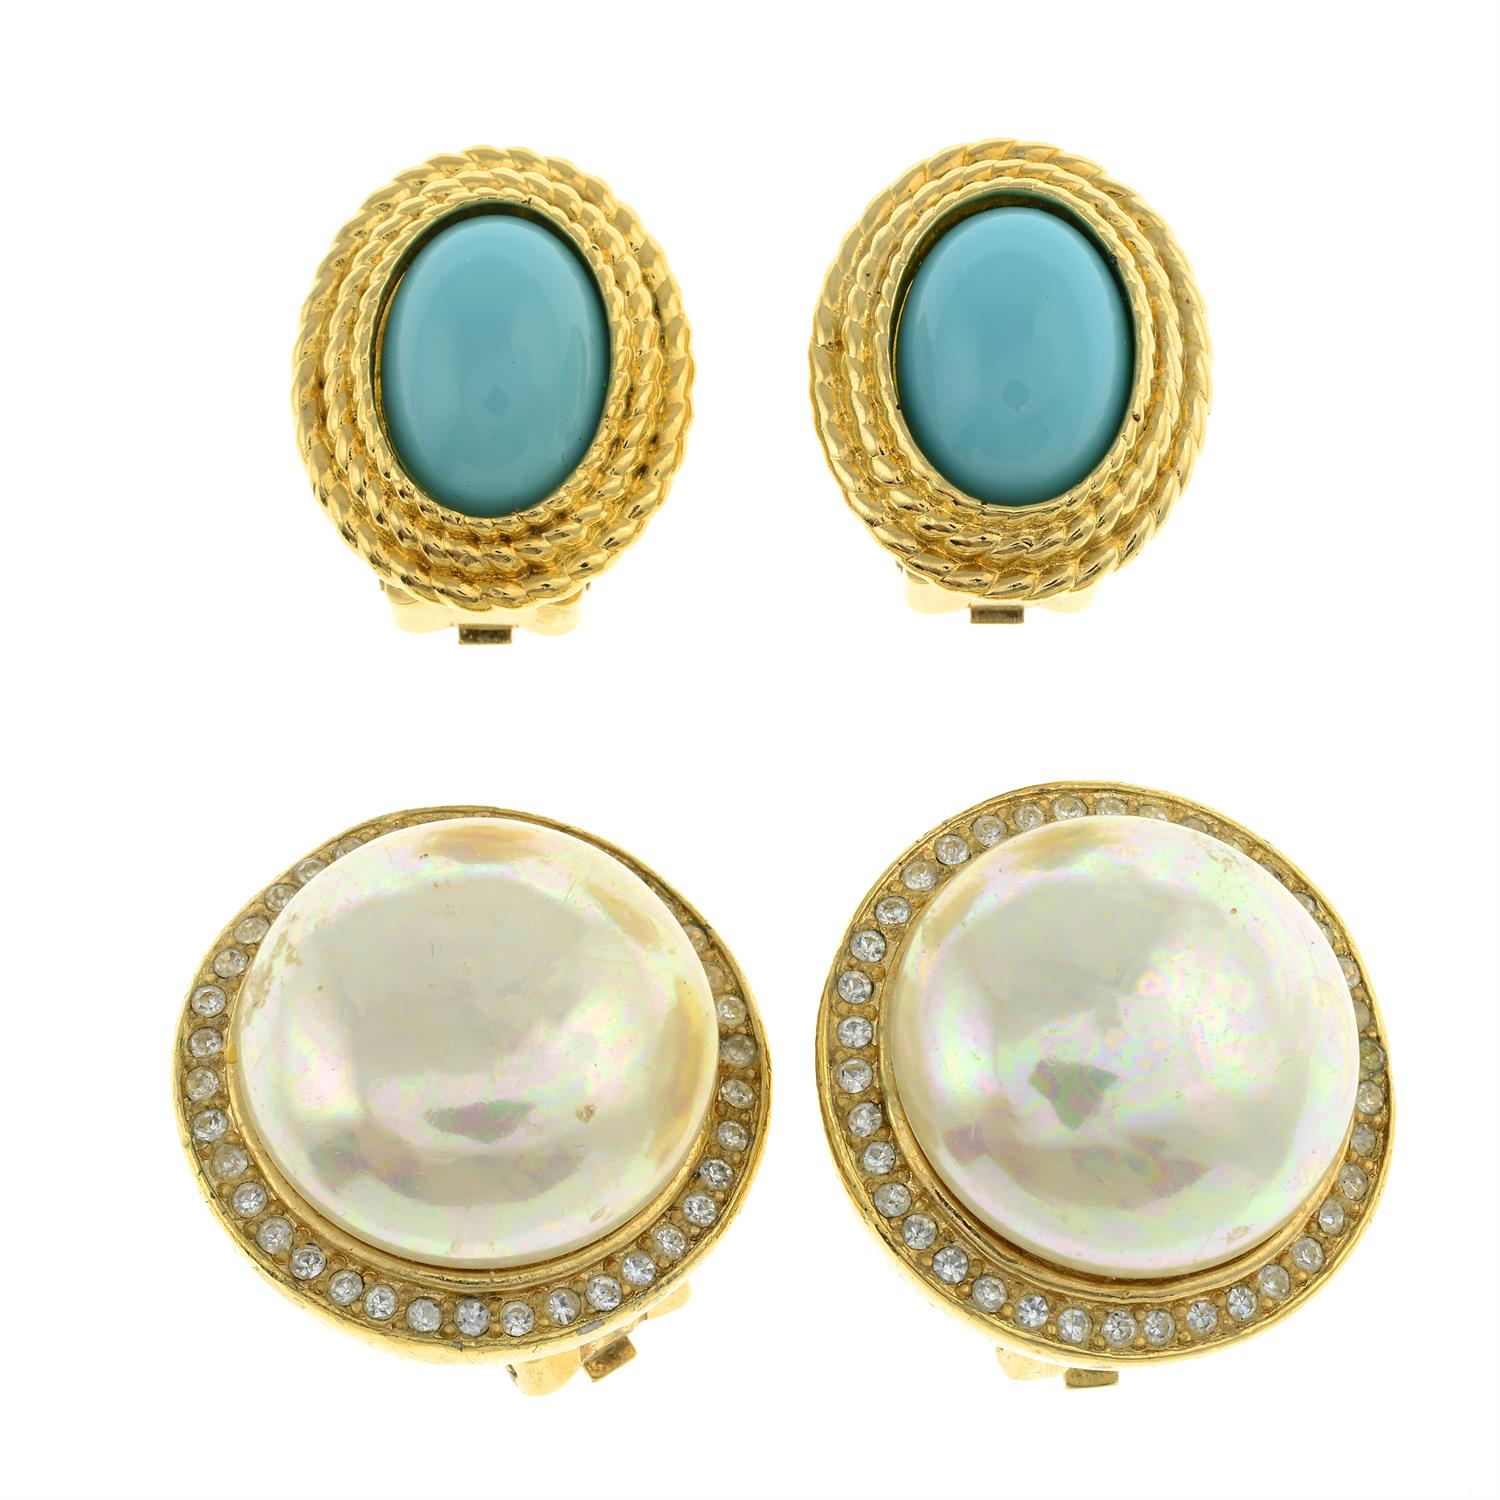 Christian Dior - two pairs of clip on earrings.